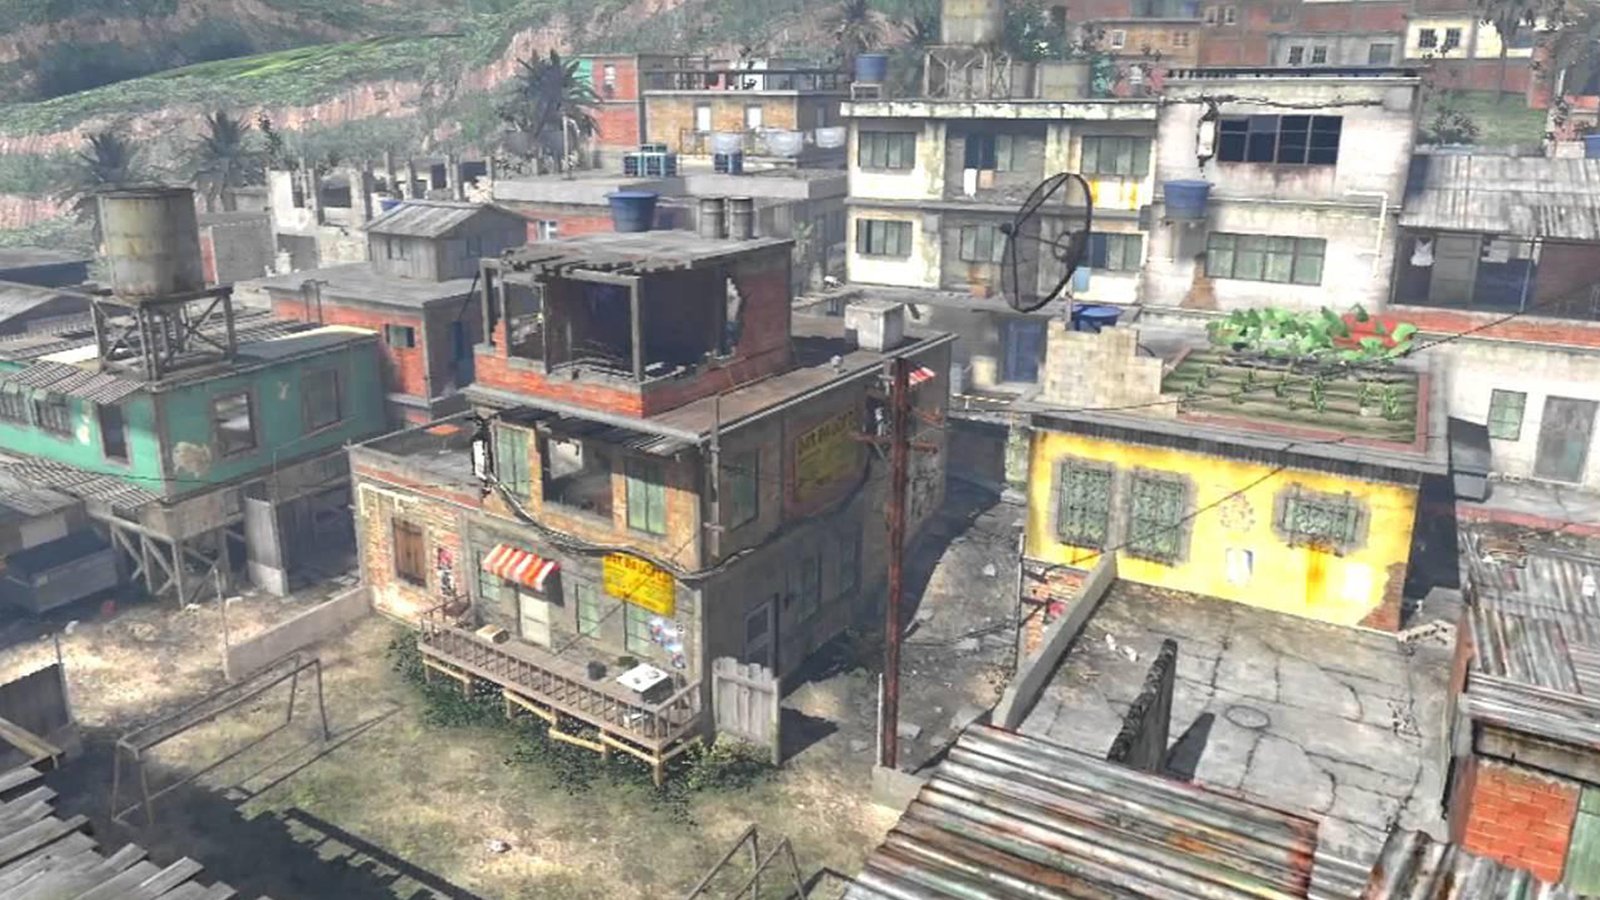 Classic Modern Warfare 2 map discovered in Ground War map - Charlie INTEL